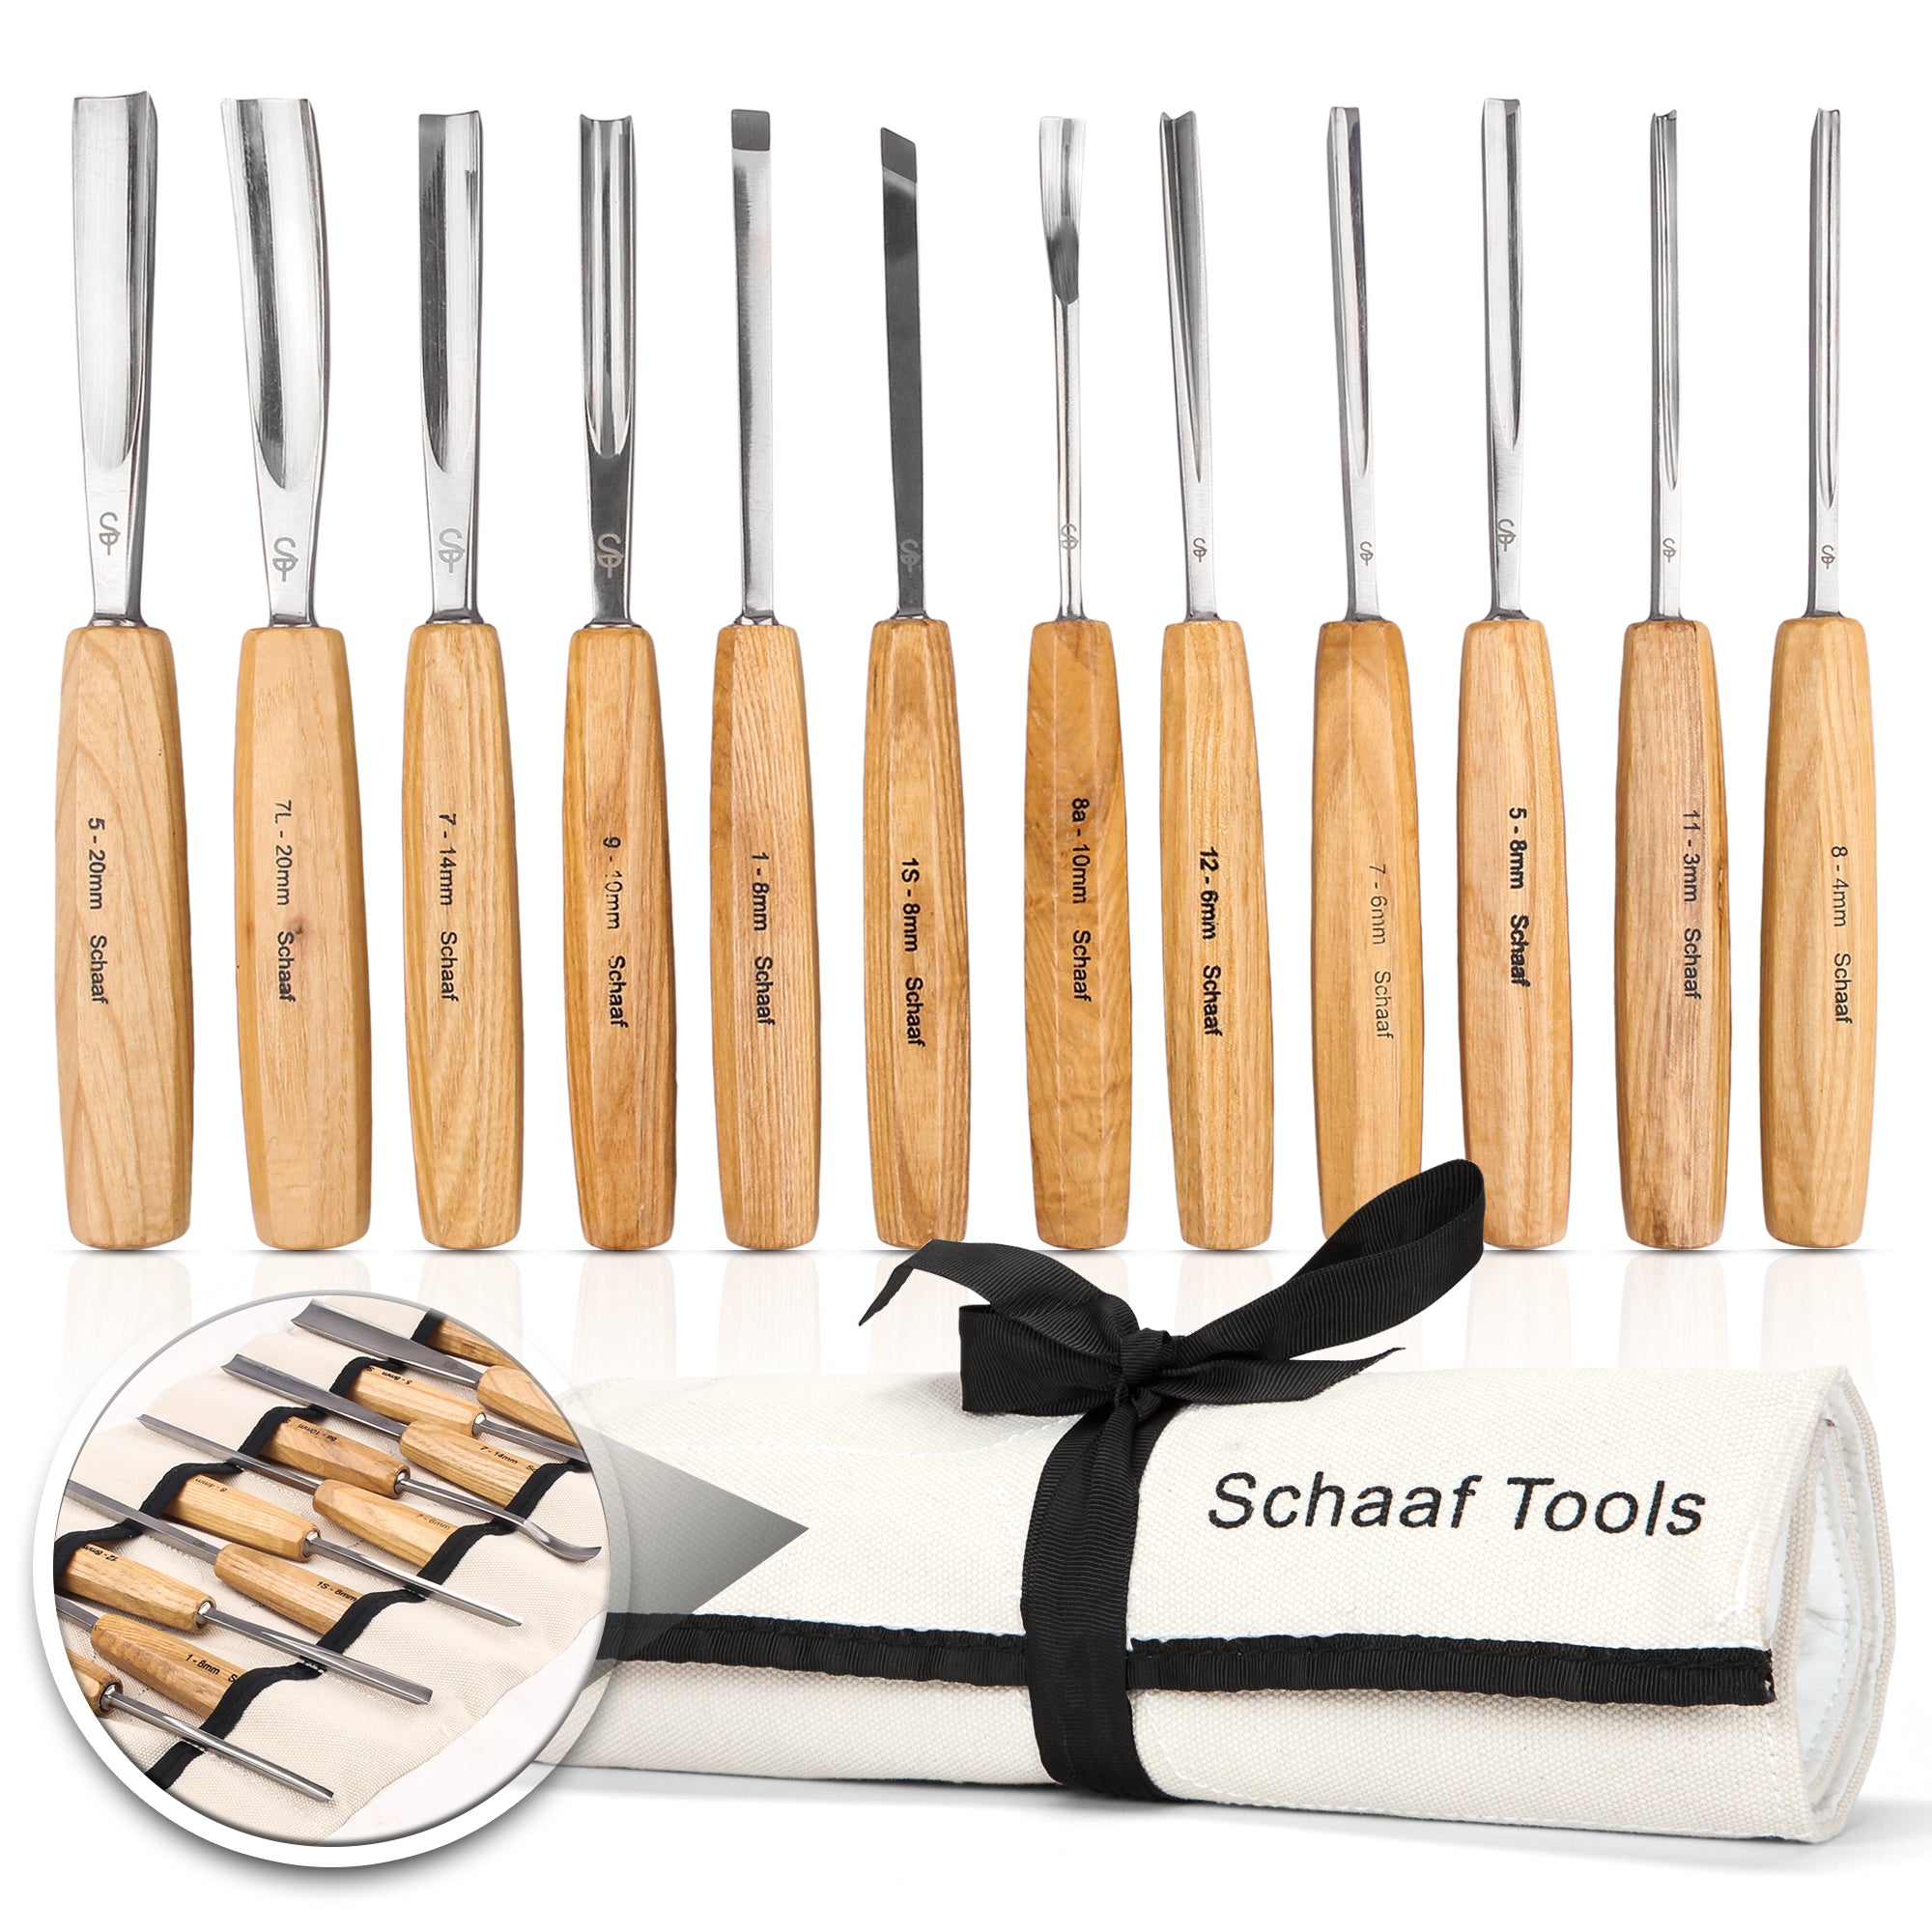 Basic Woodcarving Tools Set for Relief Carving, 3pcs STRYI Start